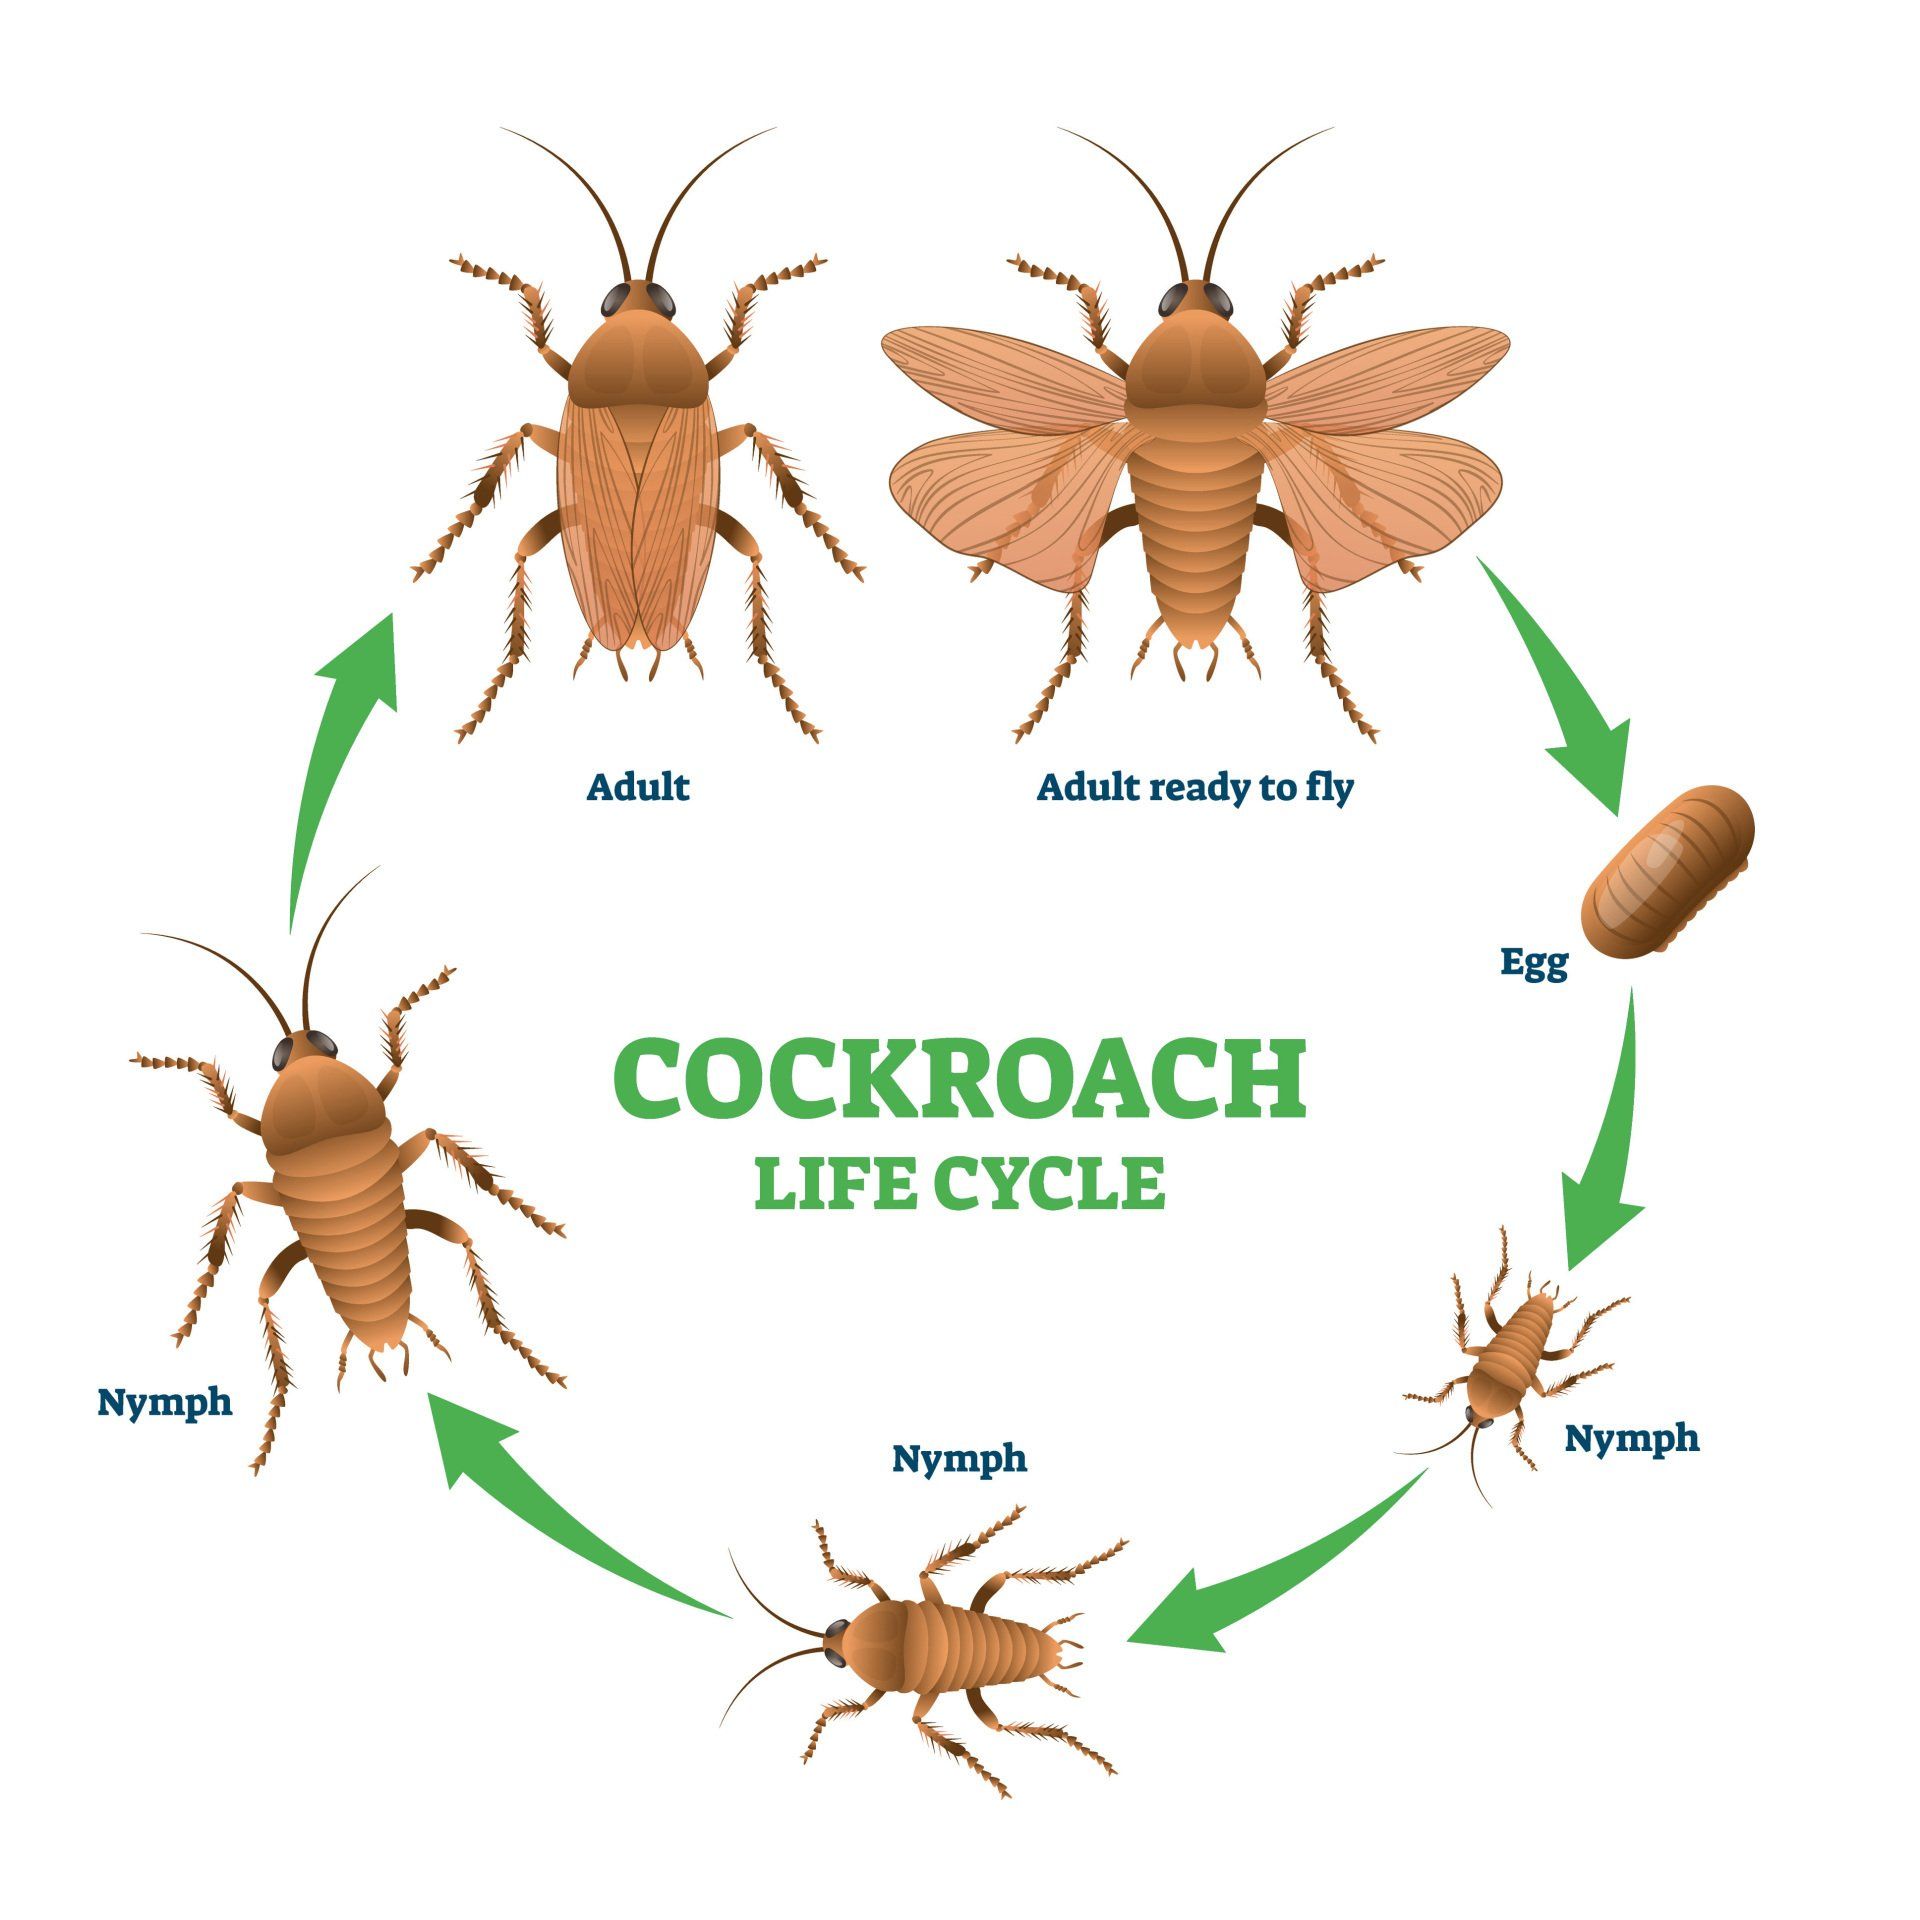 diagram that shows how cockroaches develop through the different stages of their life cycle, from cockroach eggs to cockroach nymphs to mature adults.